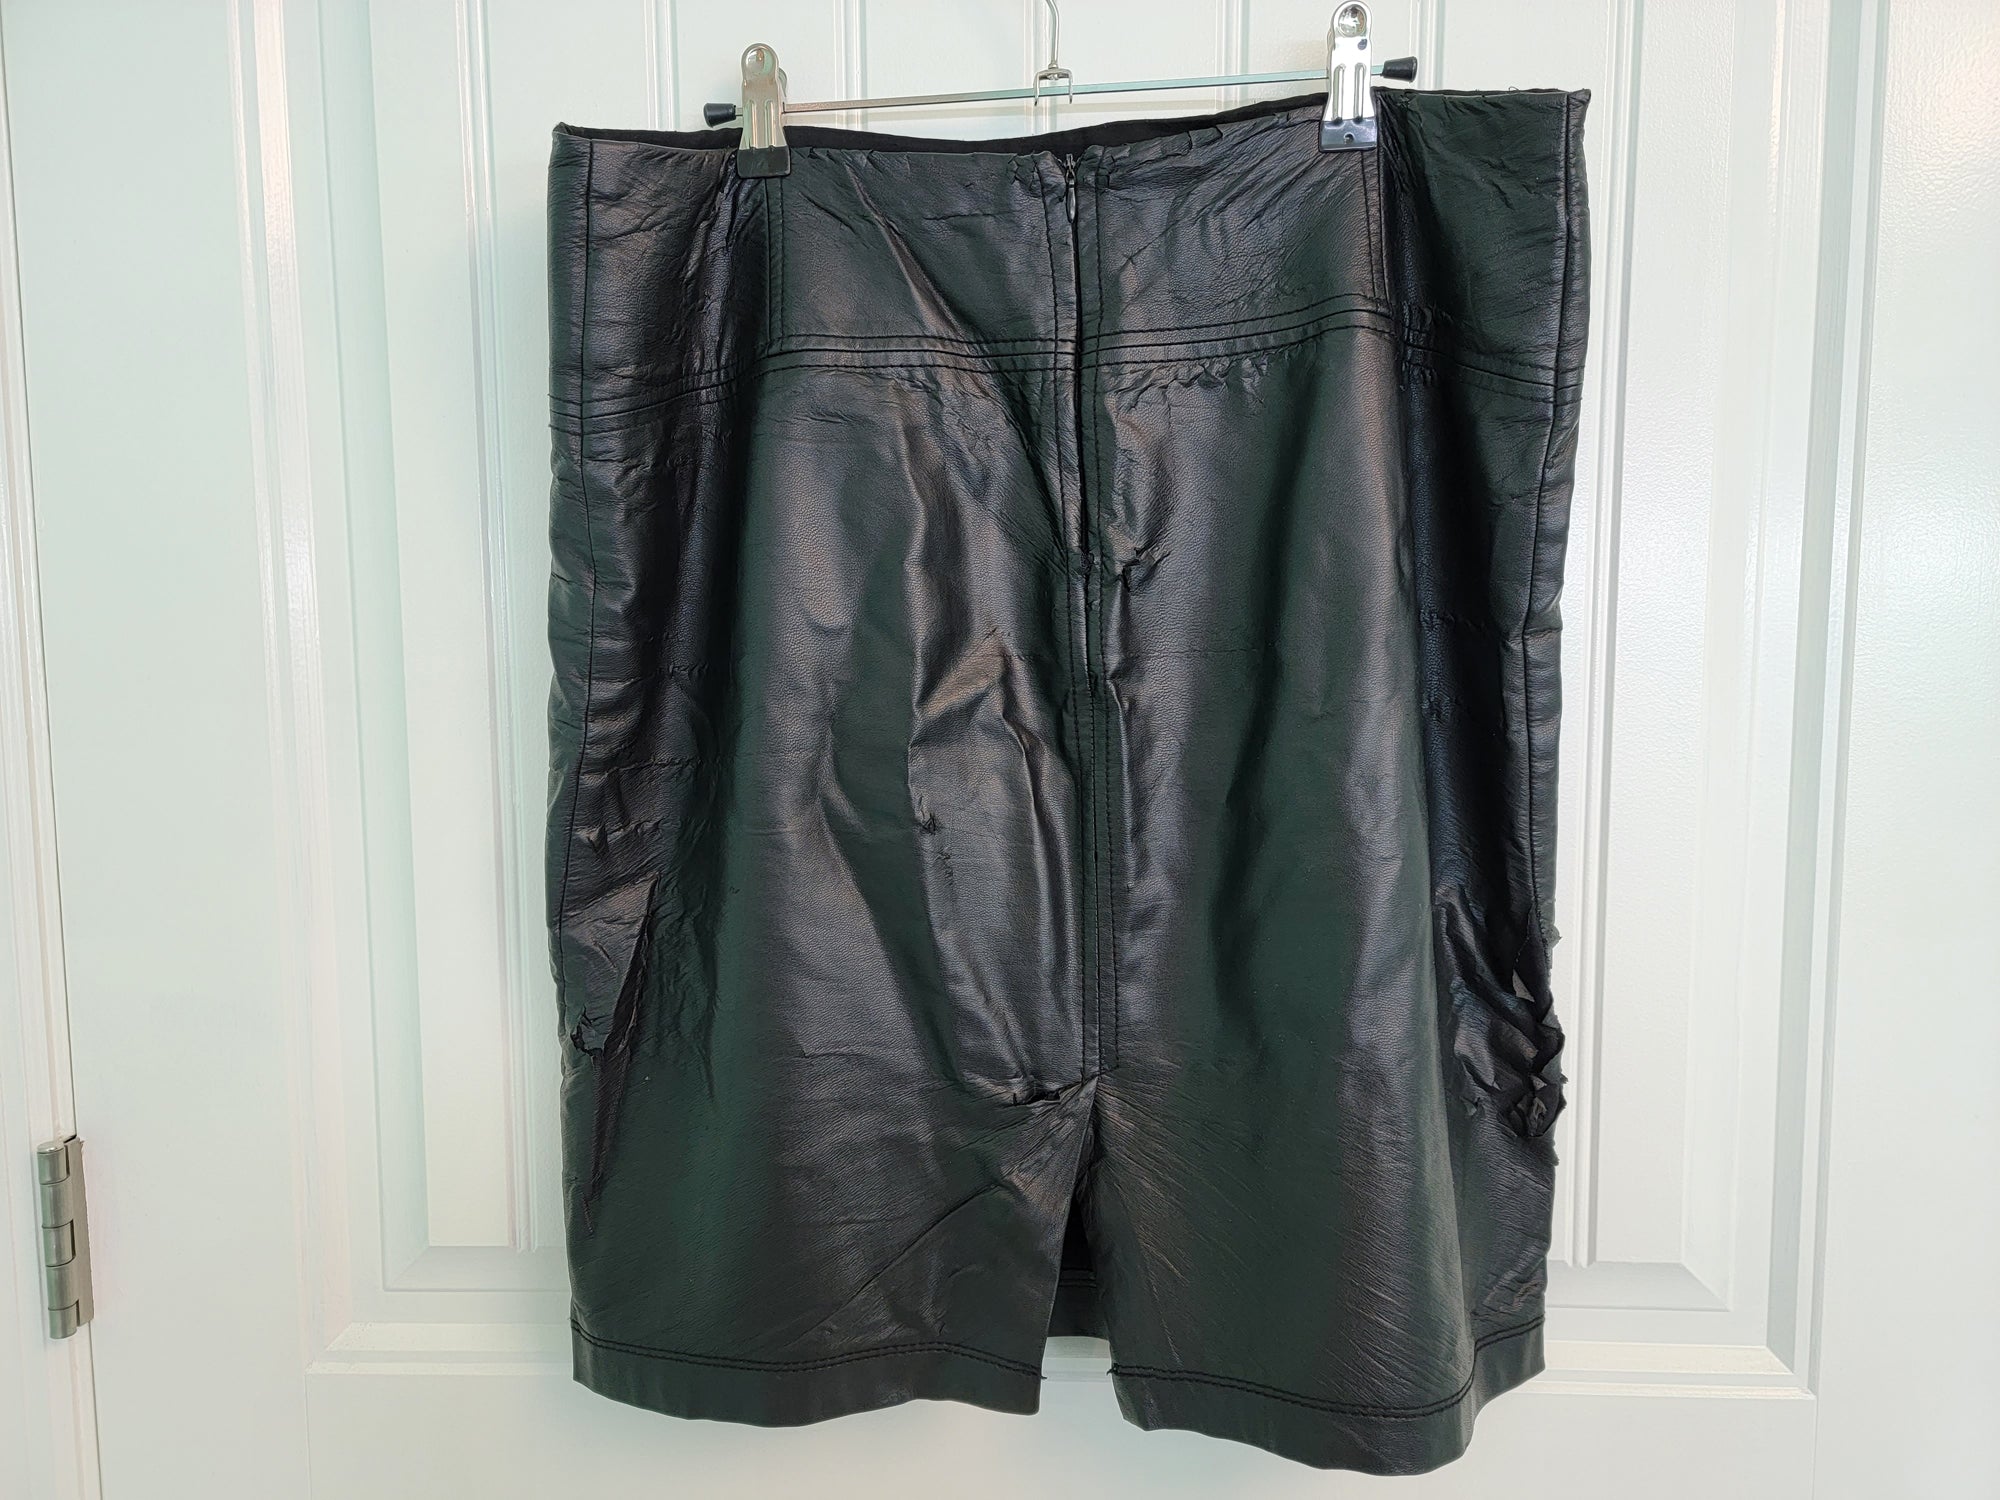 My Favorite Black NY & Co Leather Skirt (10)